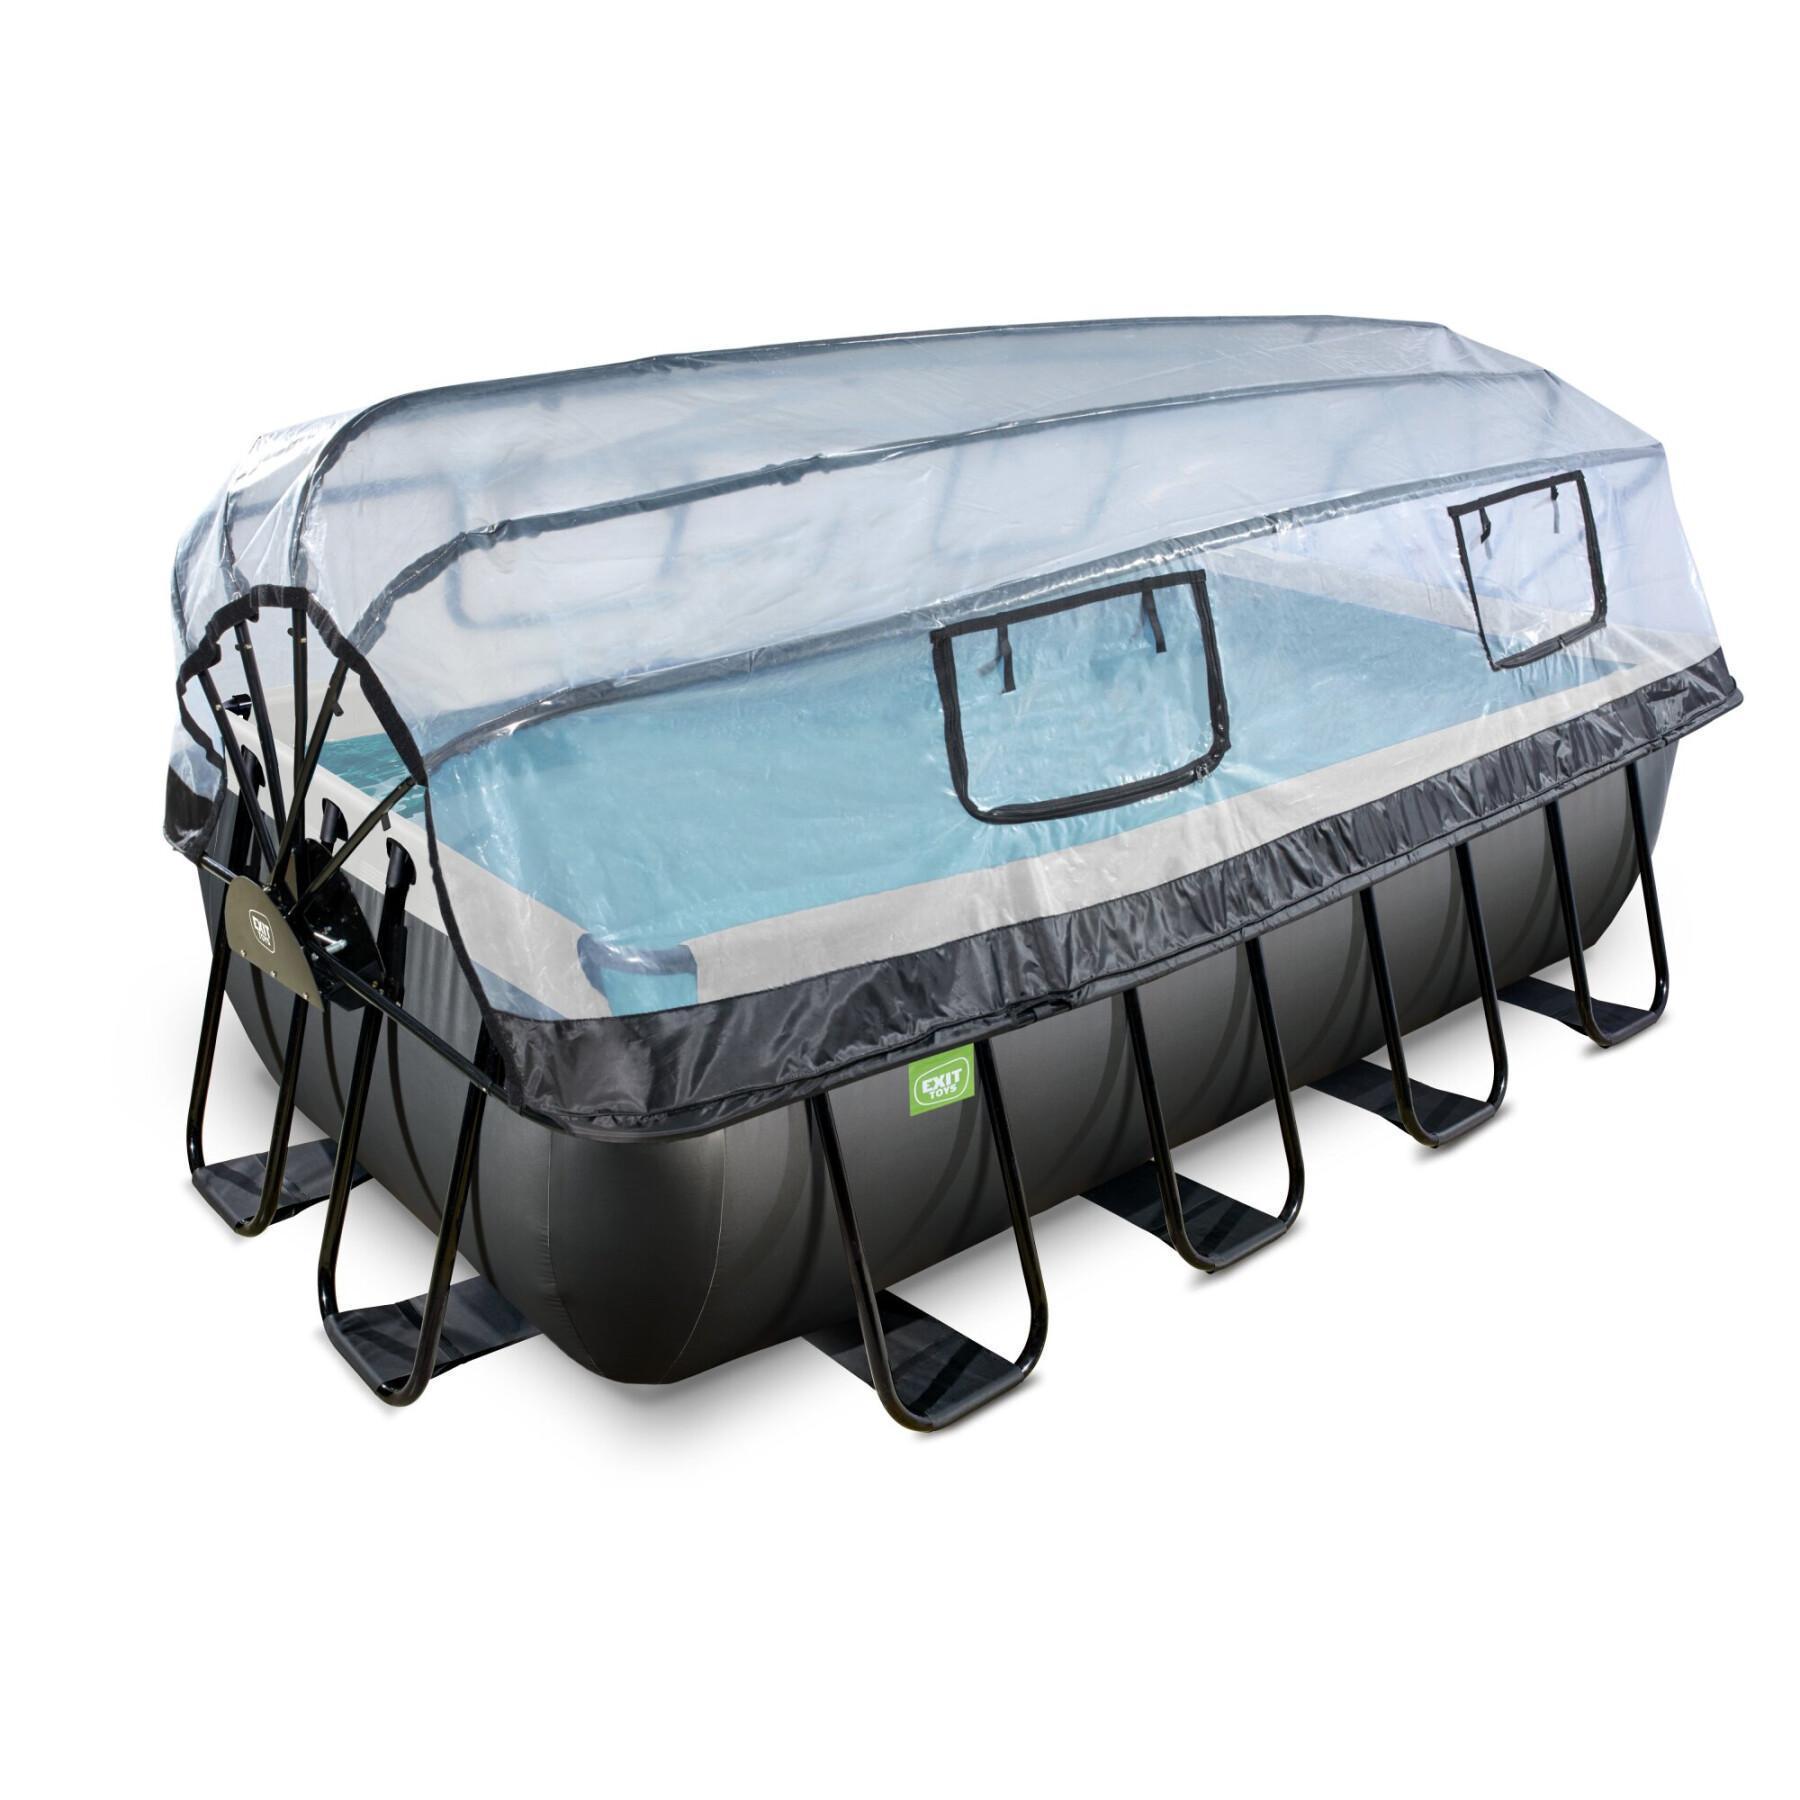 Swimming pool with sand filter pump and dome and heat pump in leather child Exit Toys 400 x 200 x 100 cm